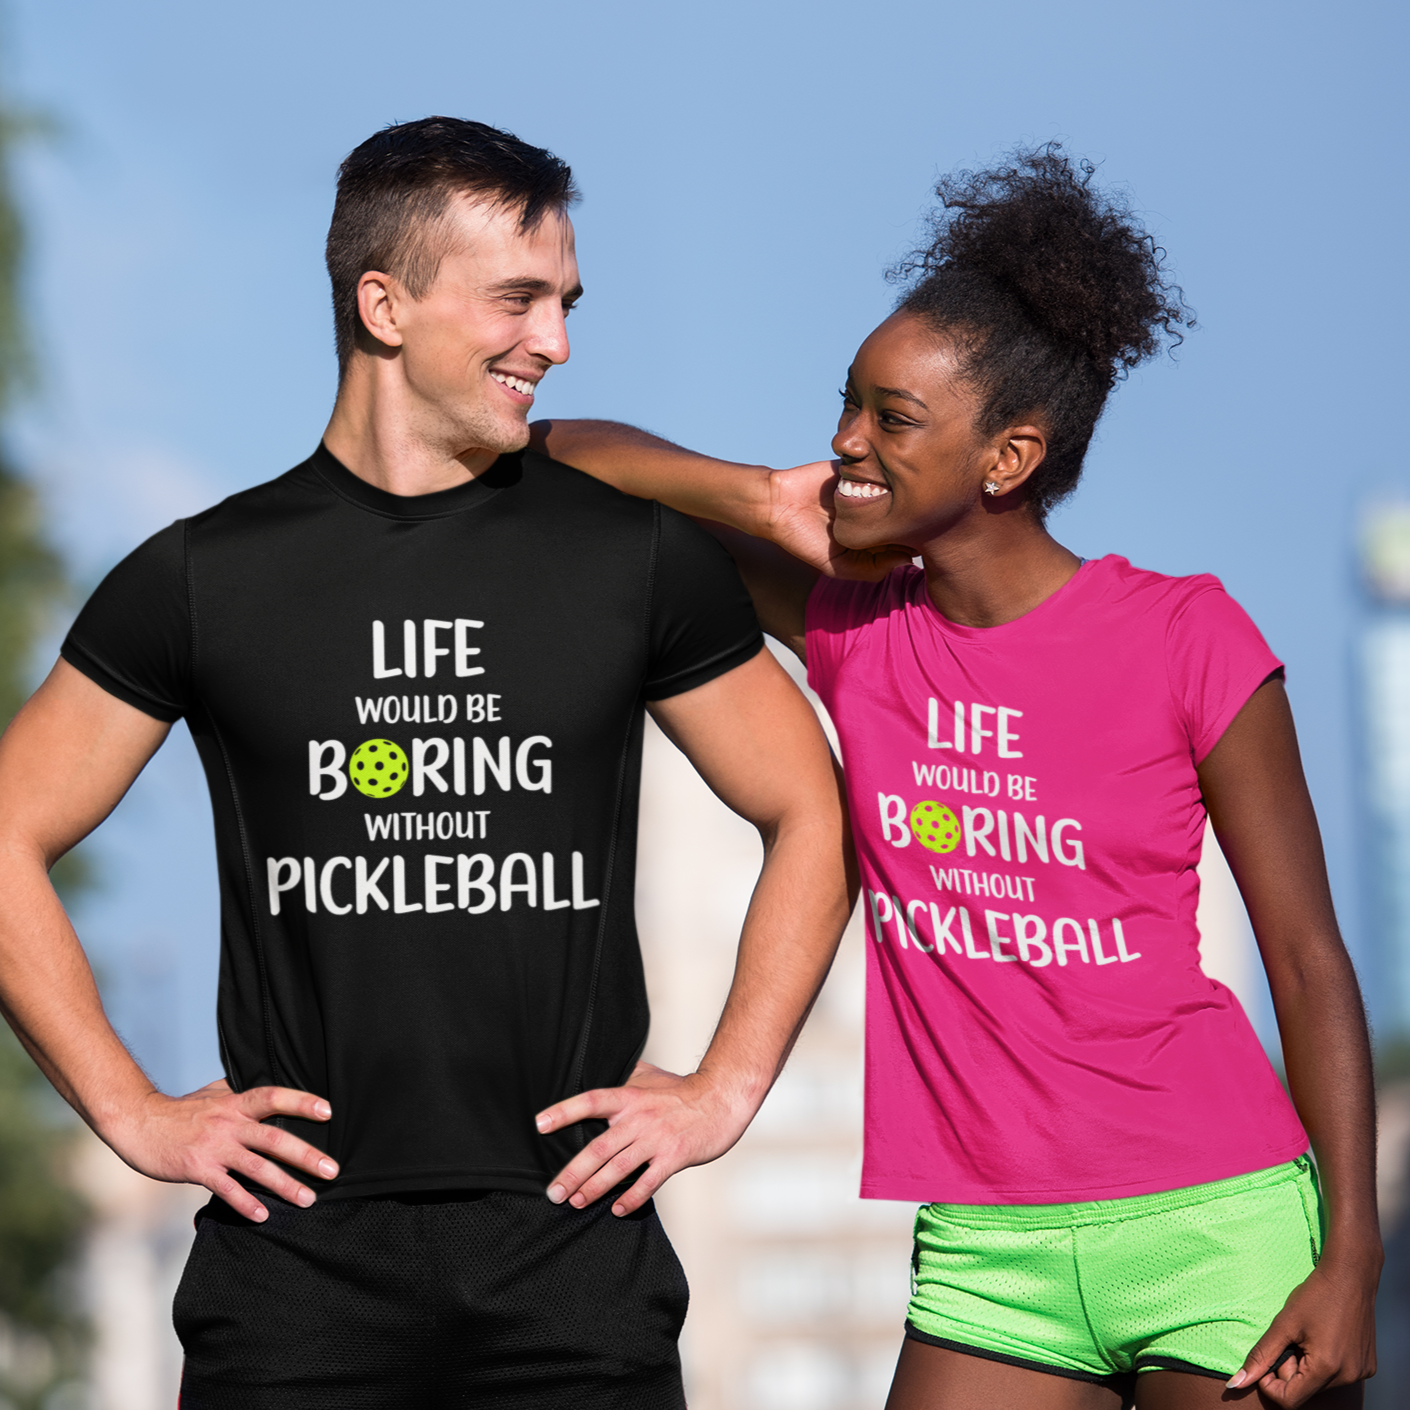 Life Would Be Boring Without Pickleball Unisex Tee